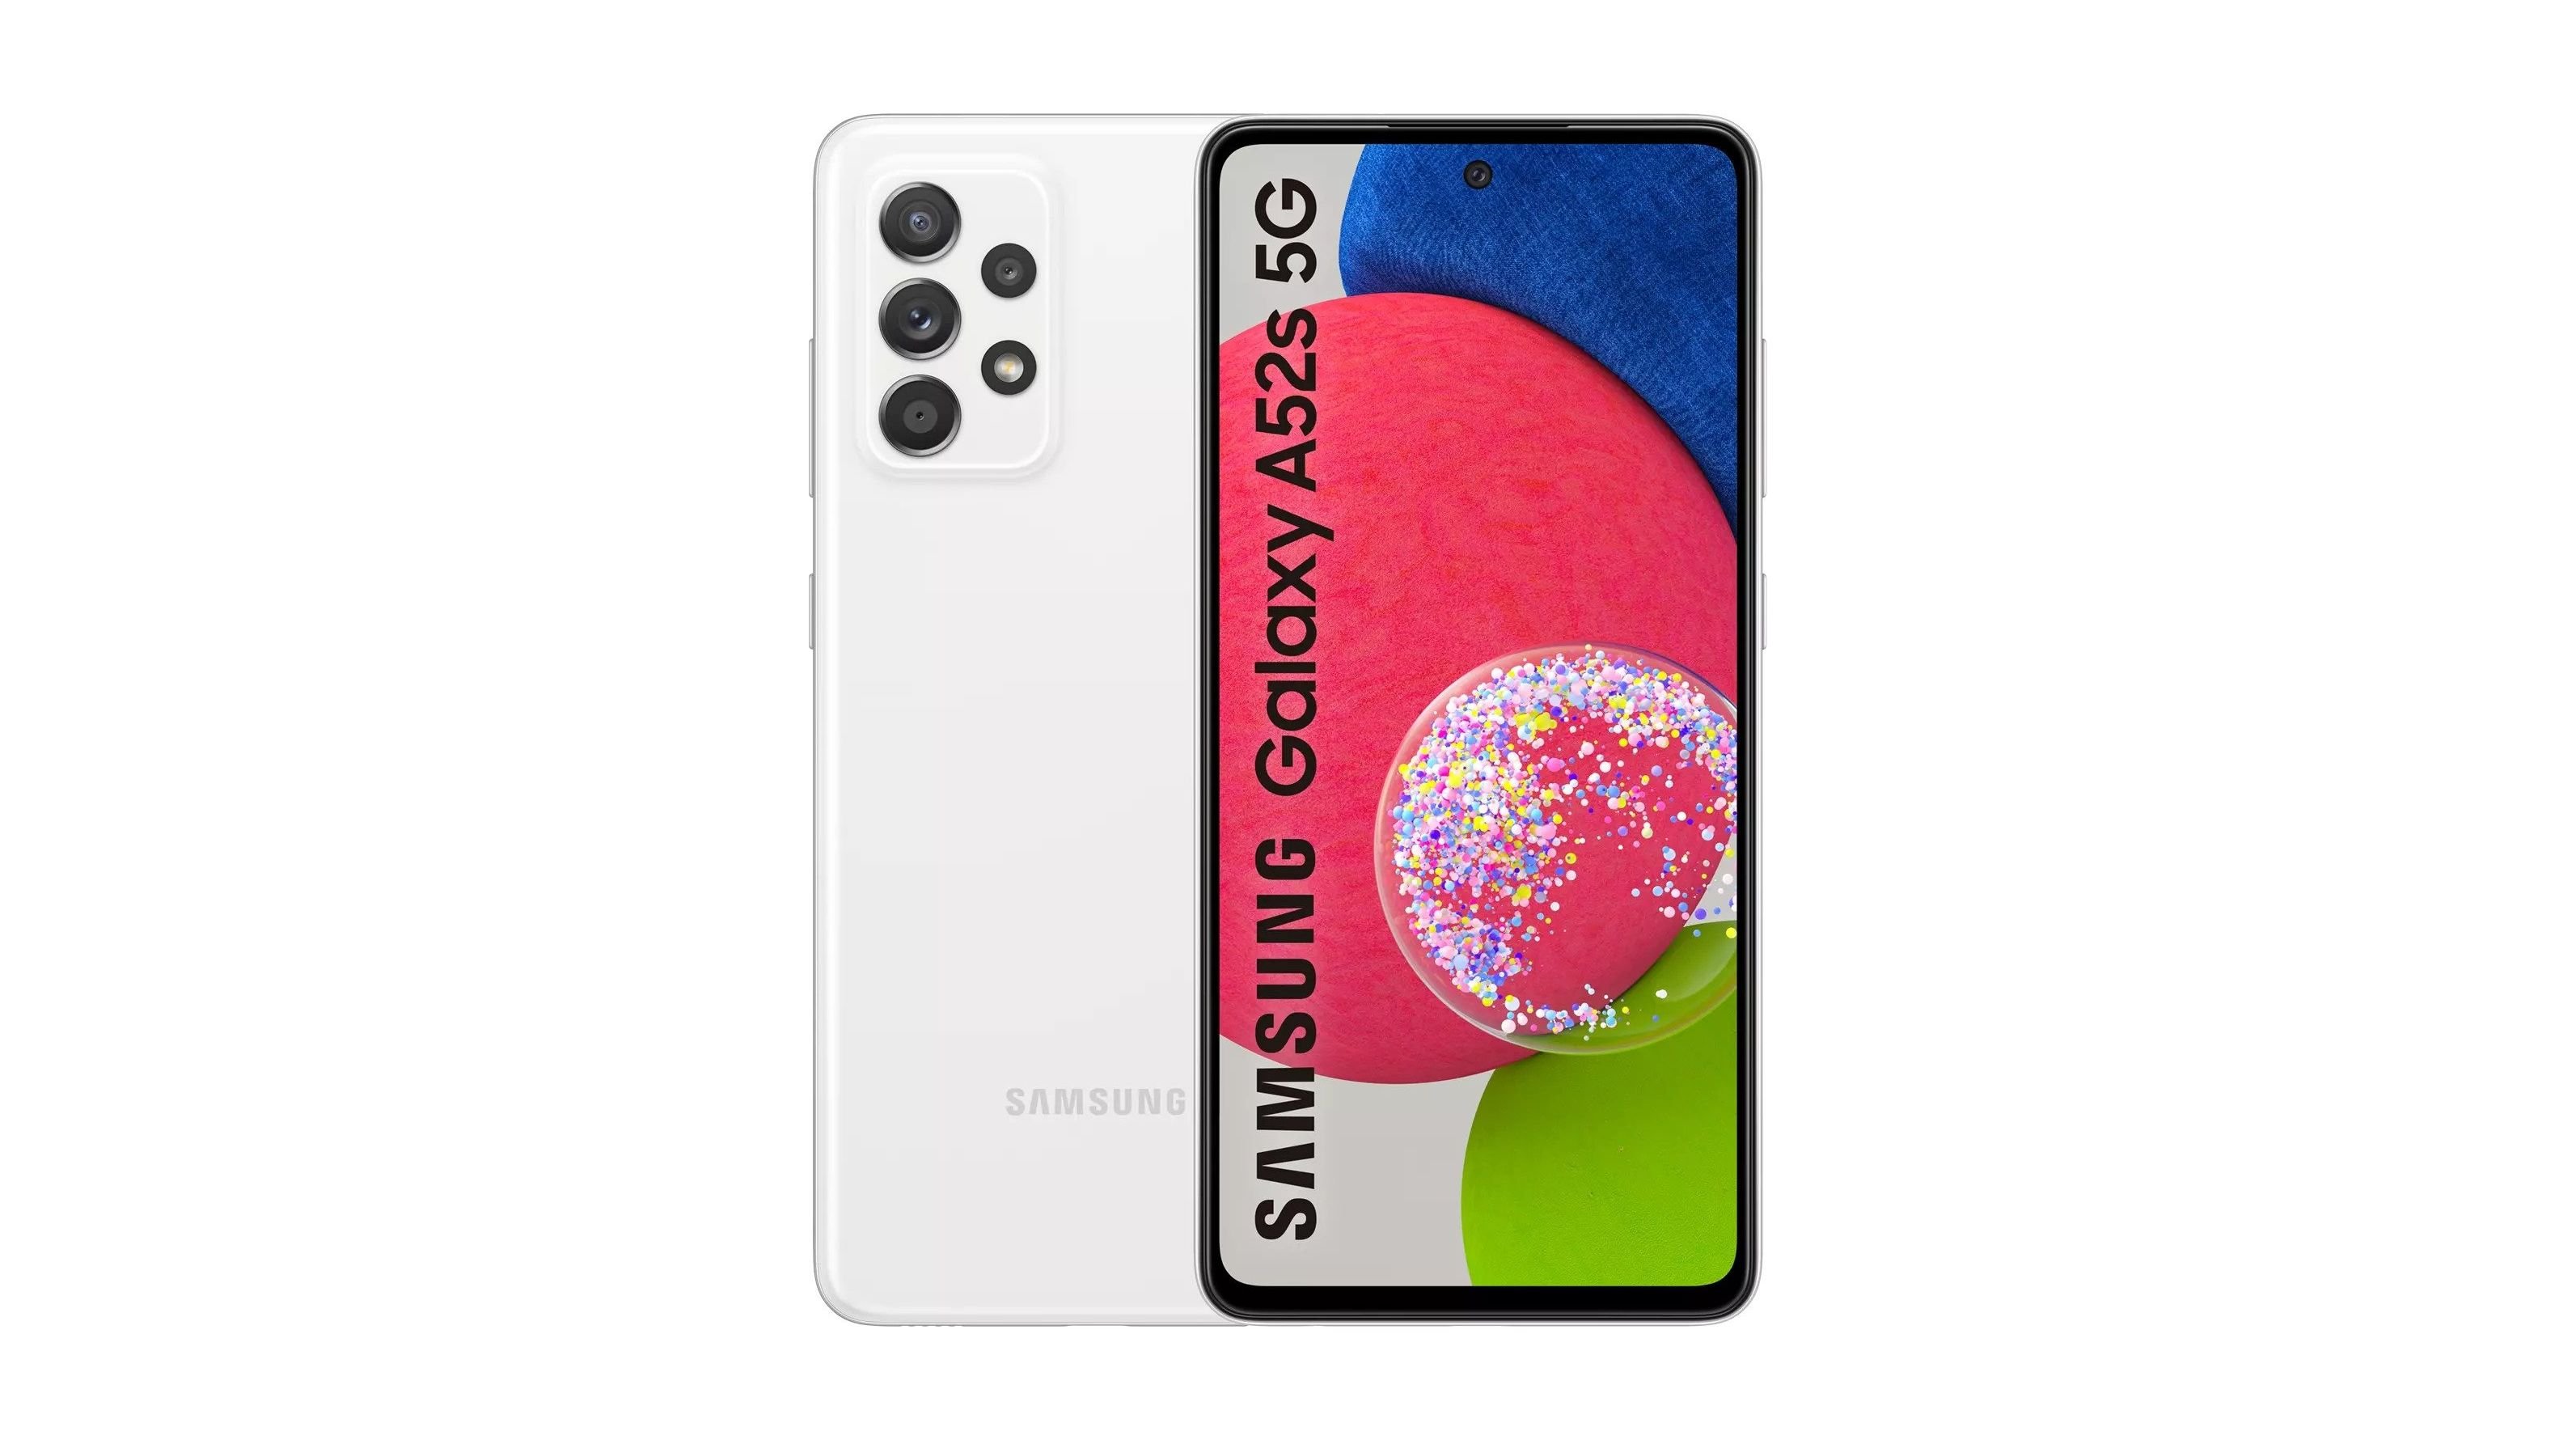 Camera Specifications for the Samsung Galaxy A52s 5G